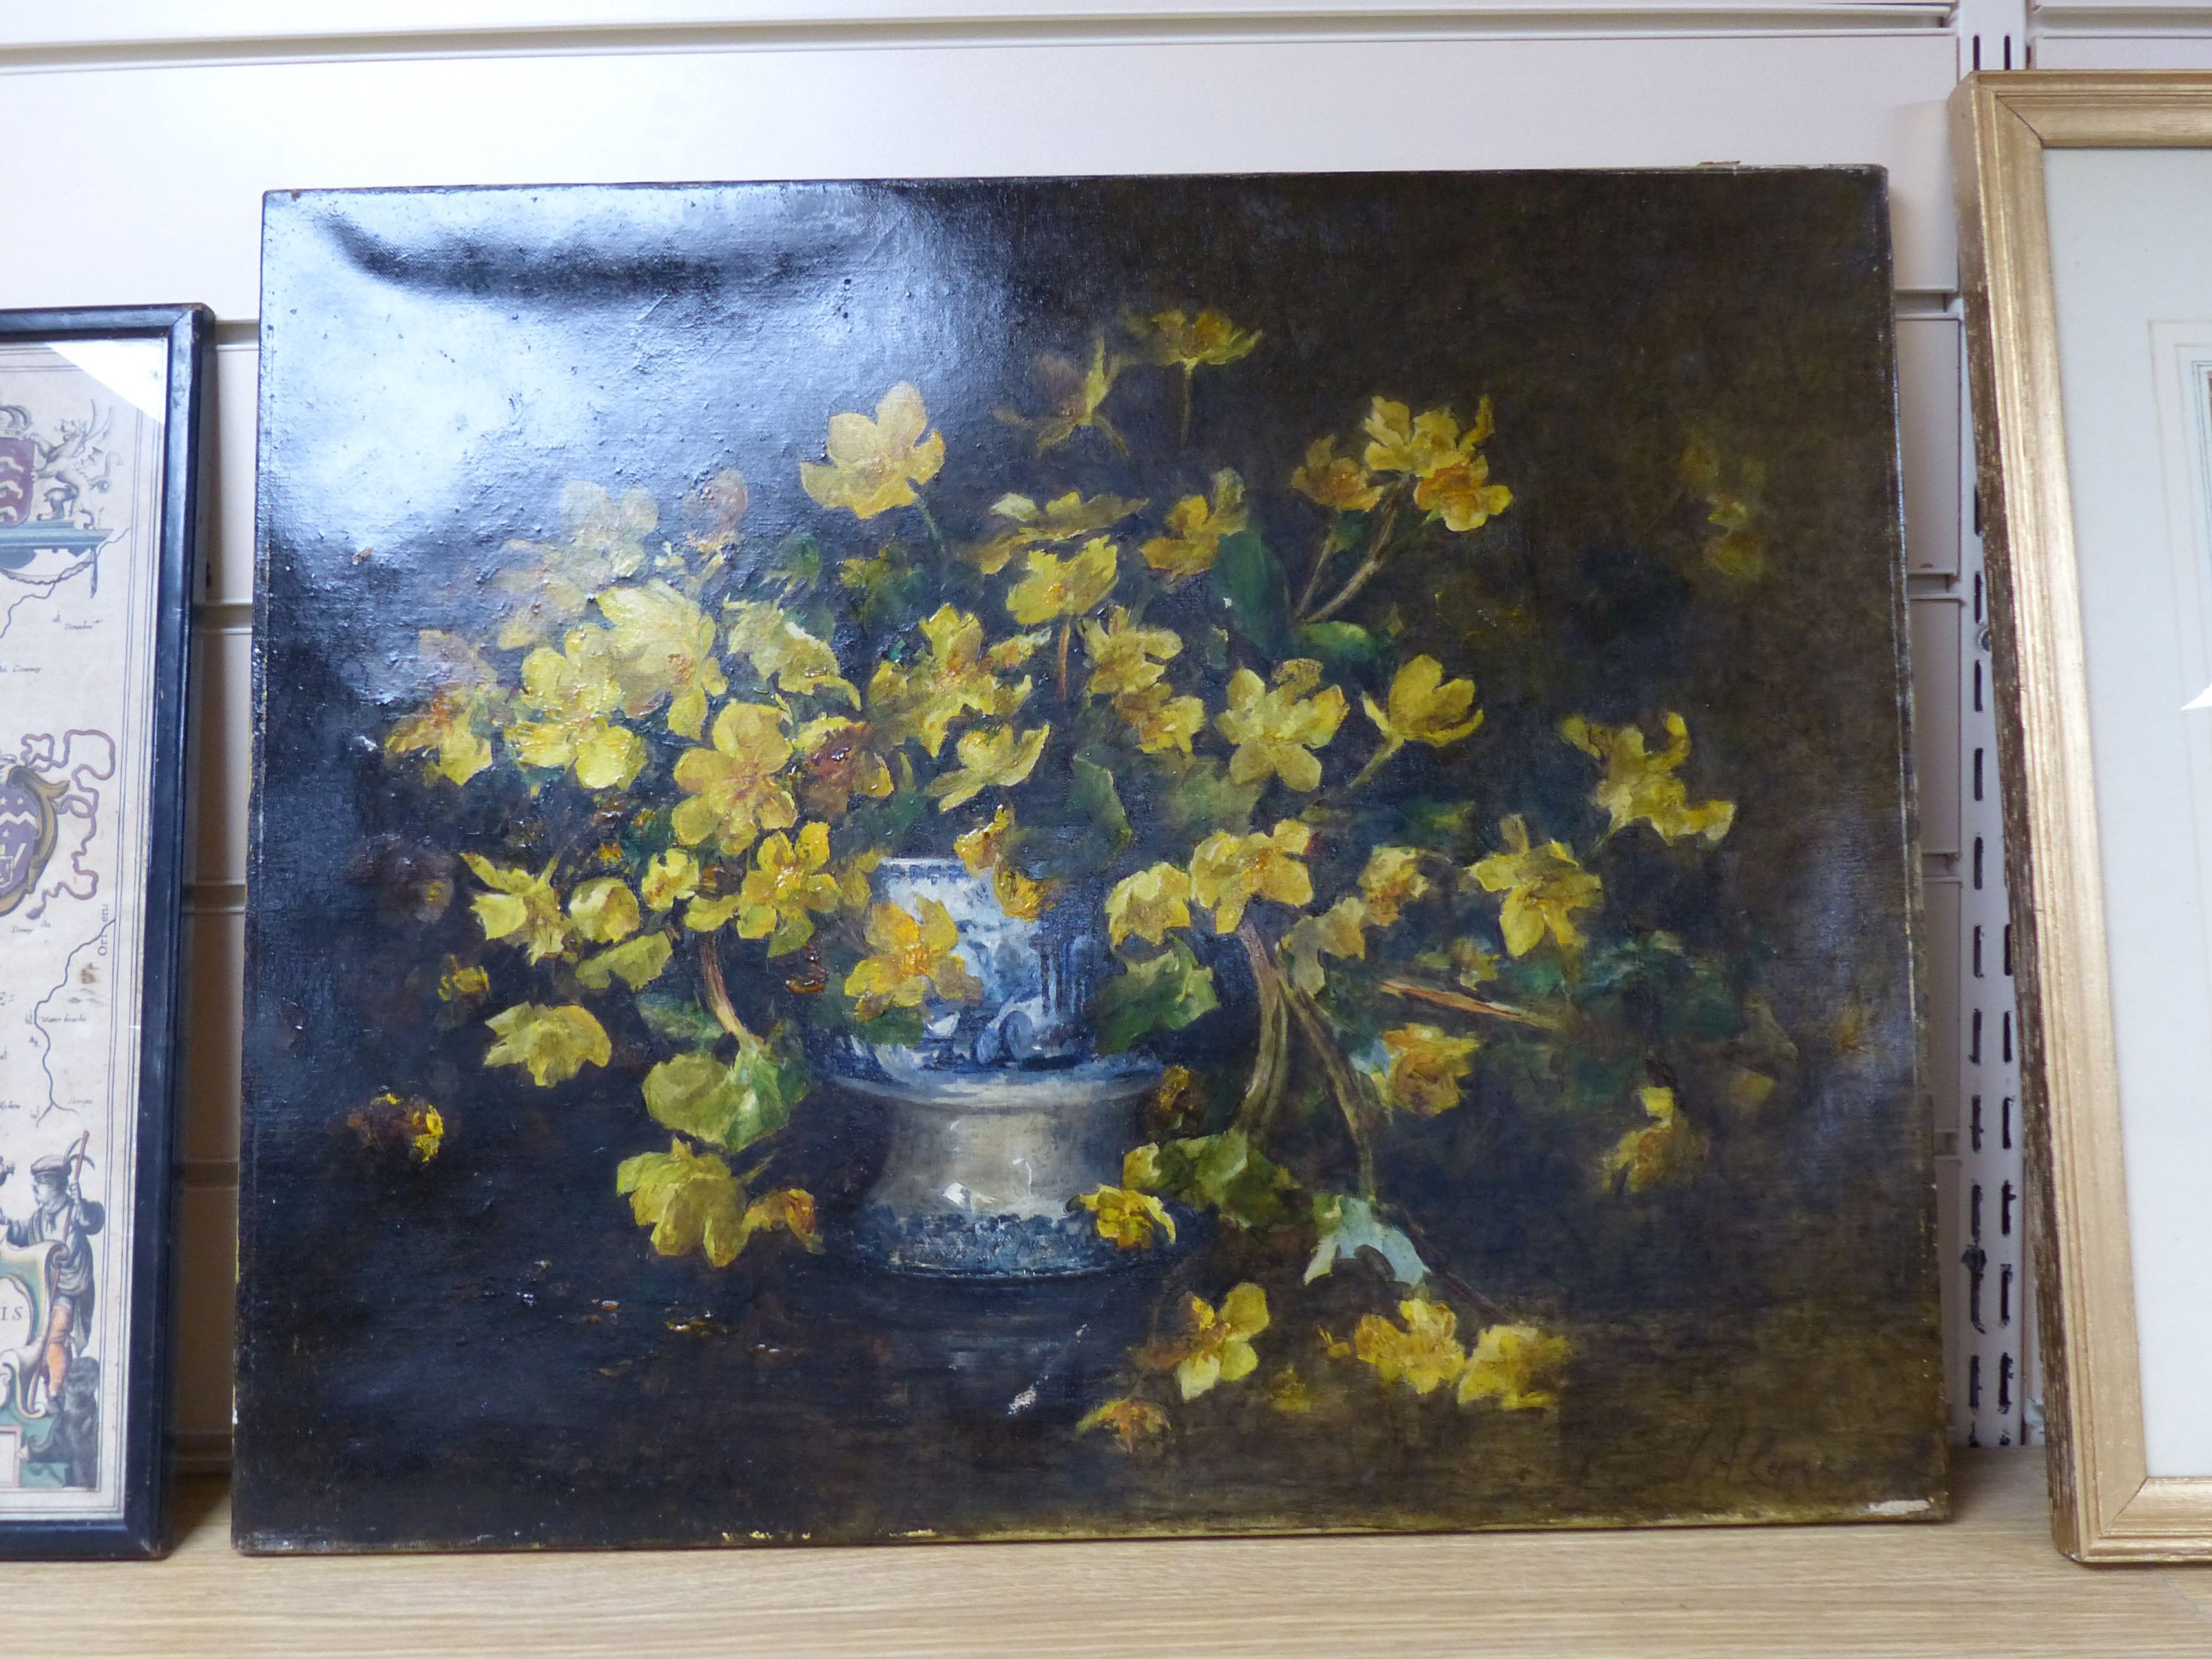 J.A. .... , oil on canvas, Still life of daffodils in a vase, signed, 46 x 56cm, unframed